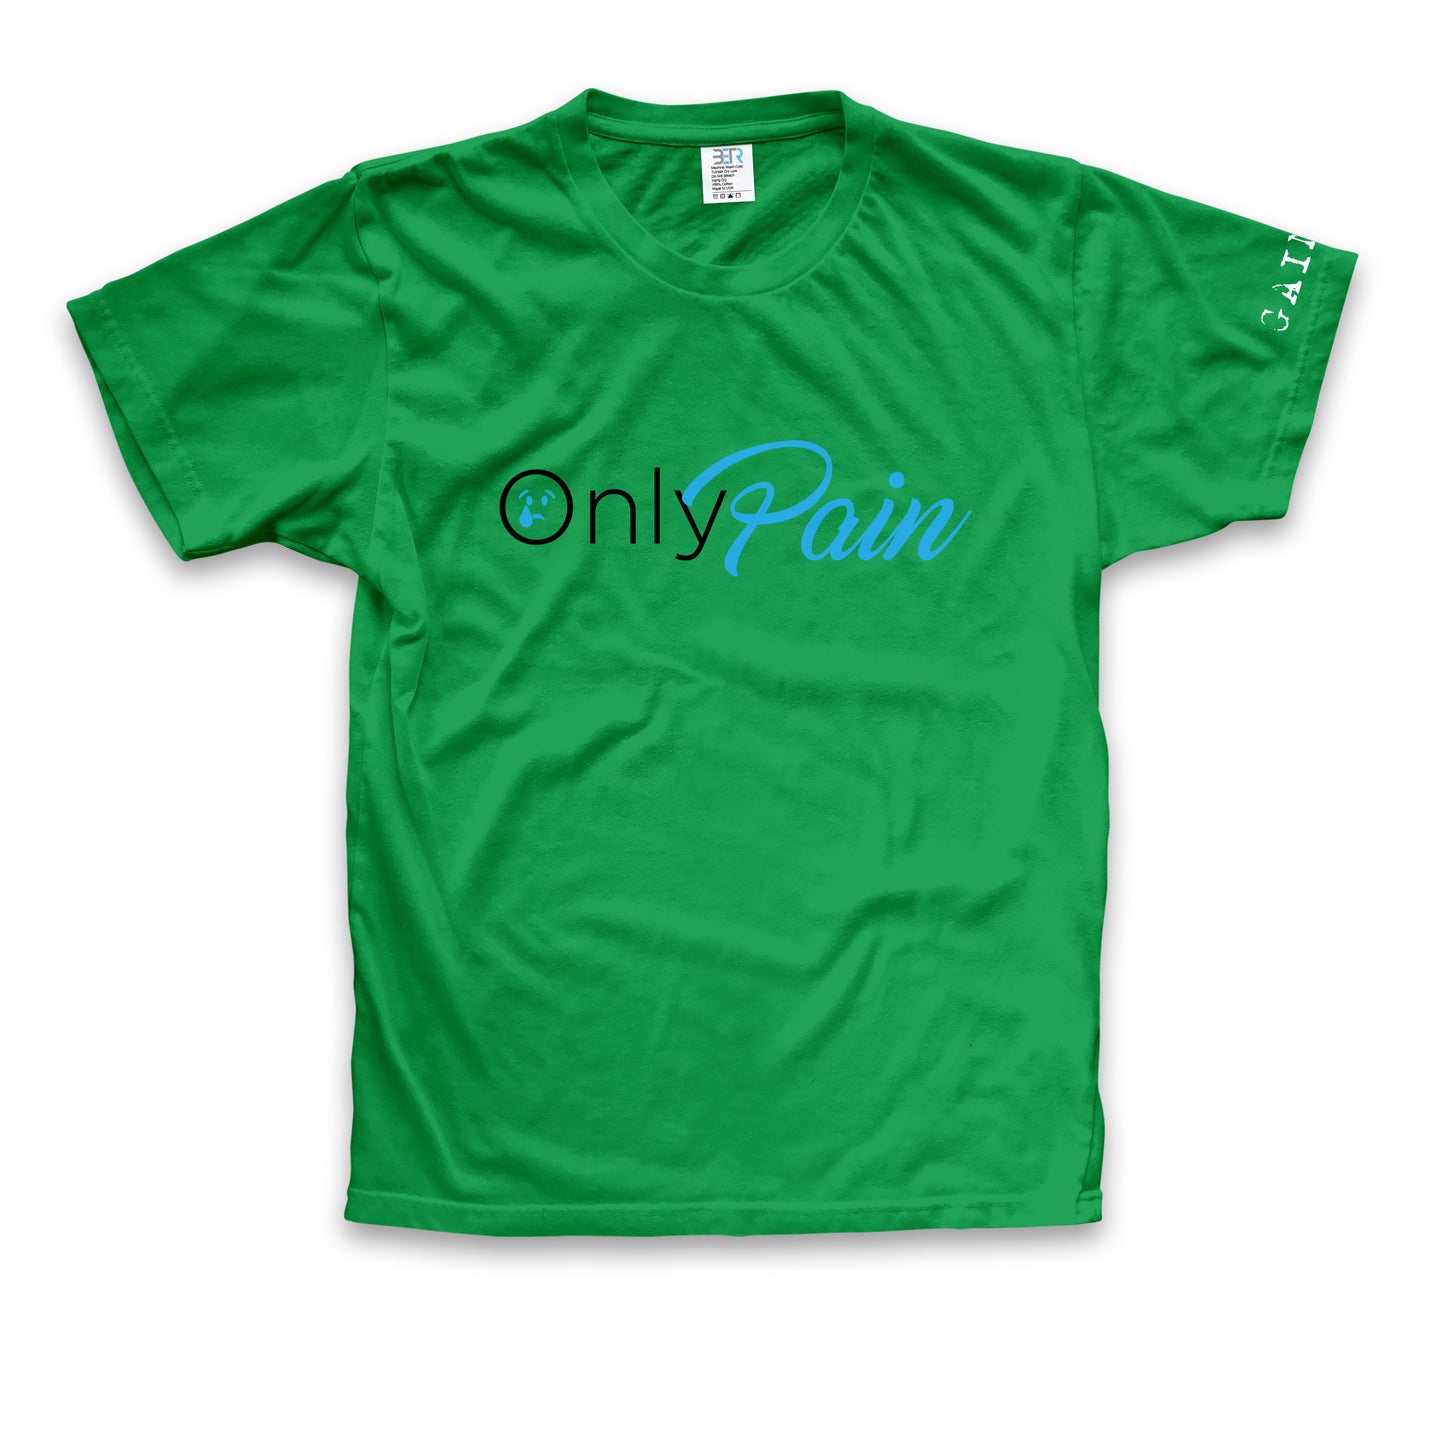 Only Pain tee